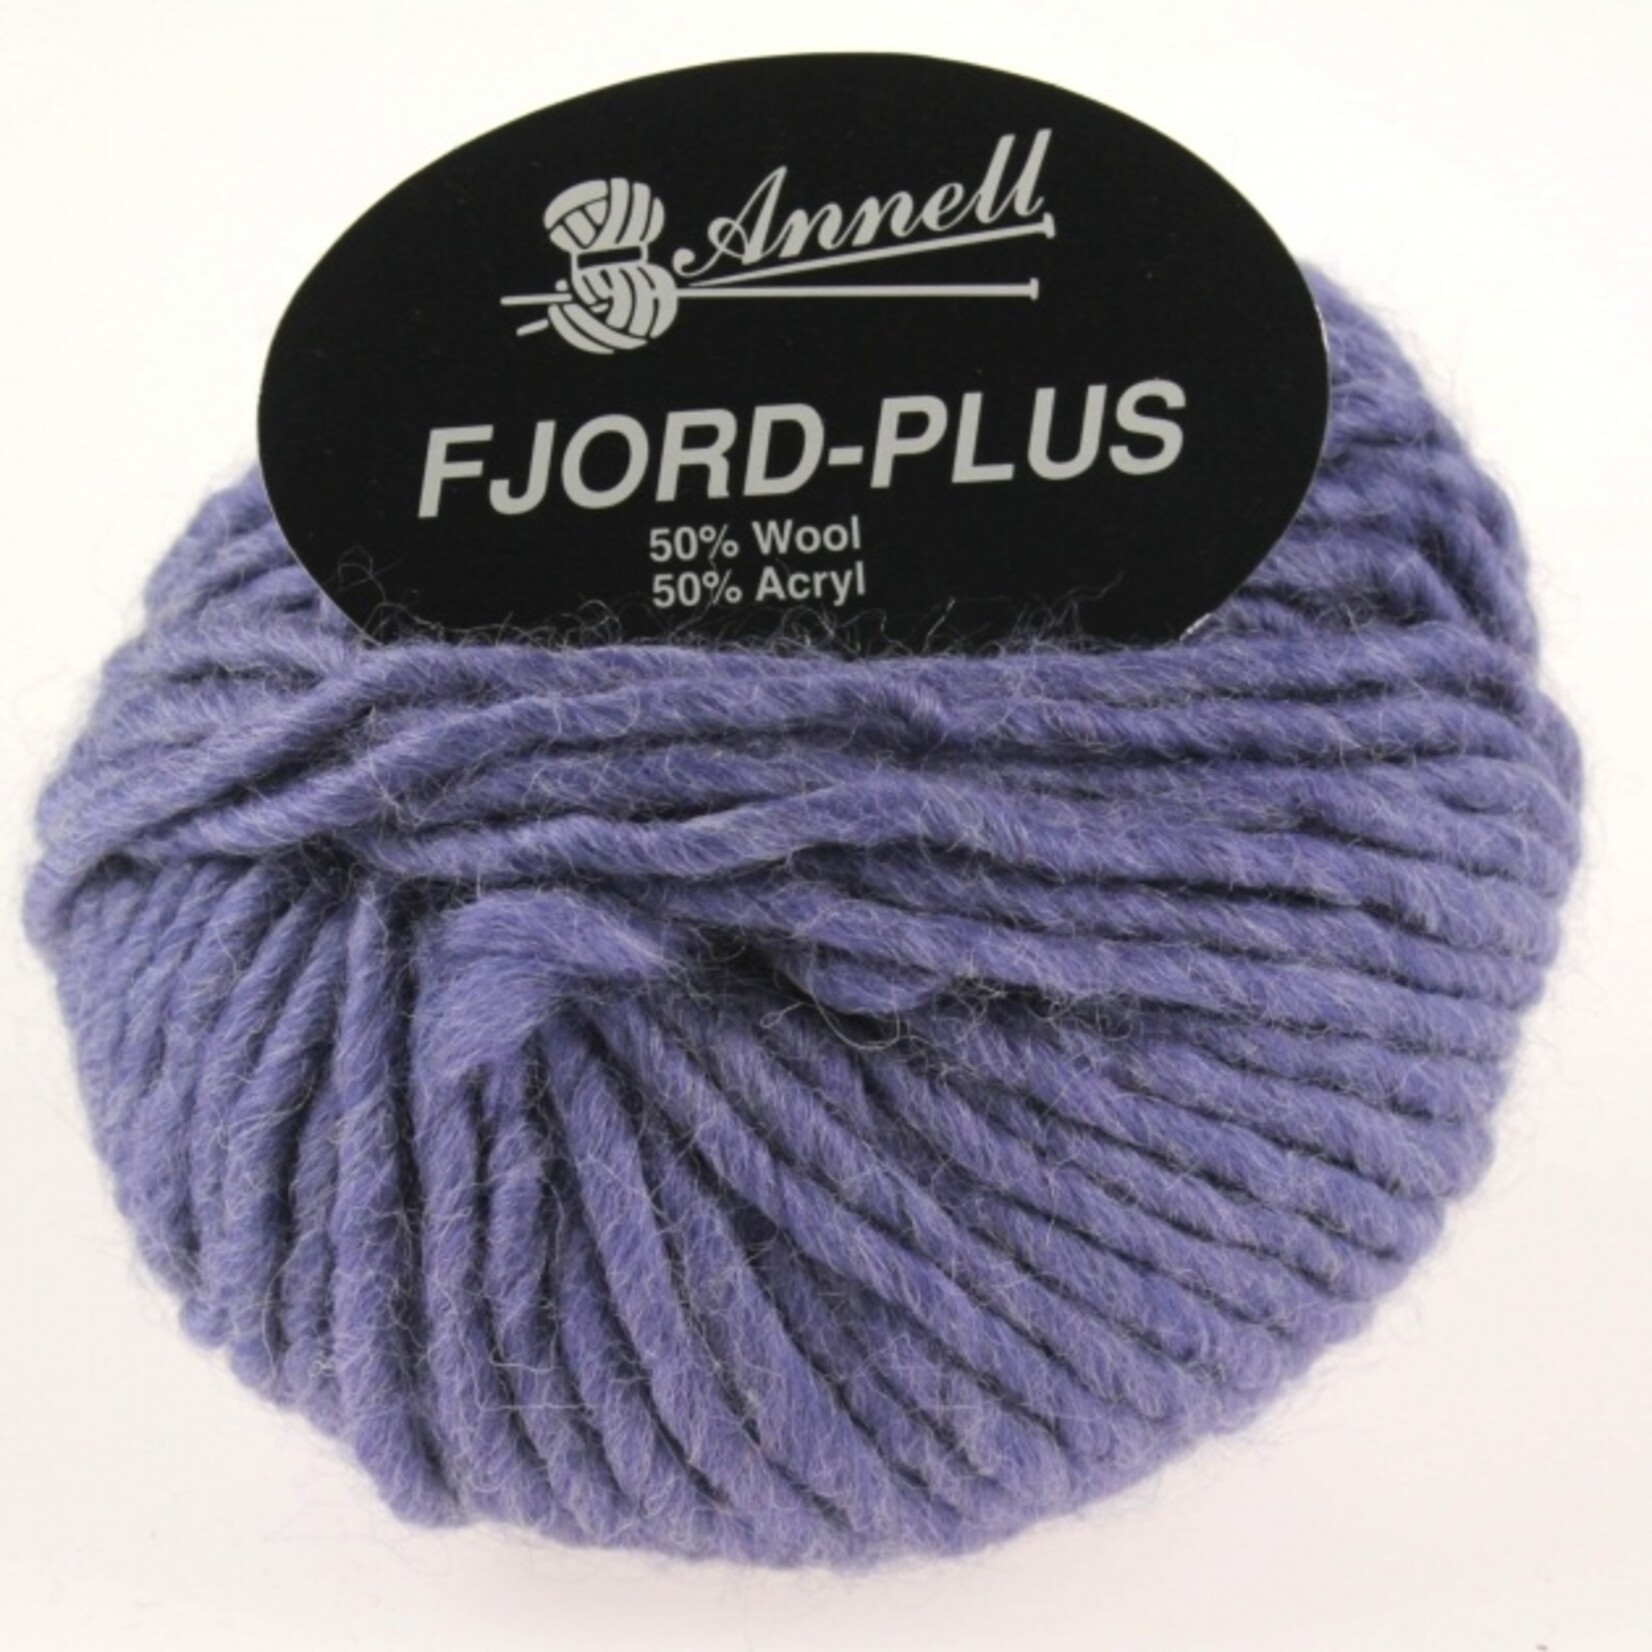 annell fjord plus 0855